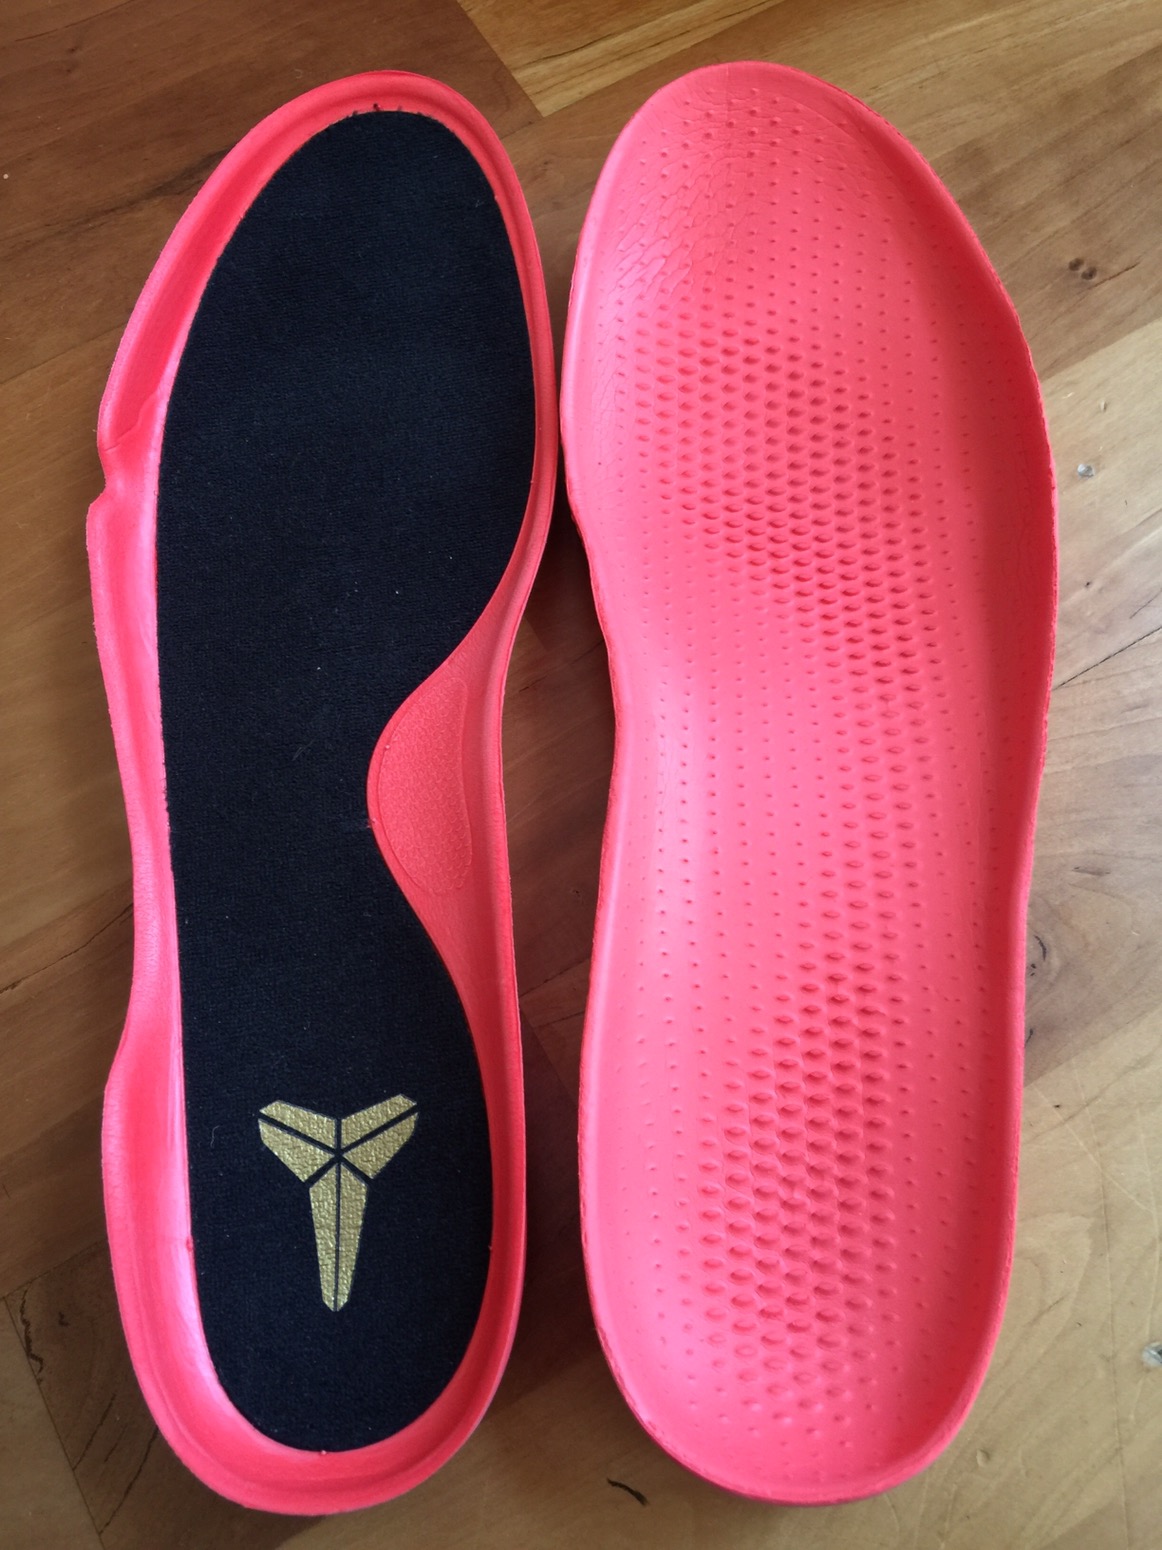 nike full length zoom insole